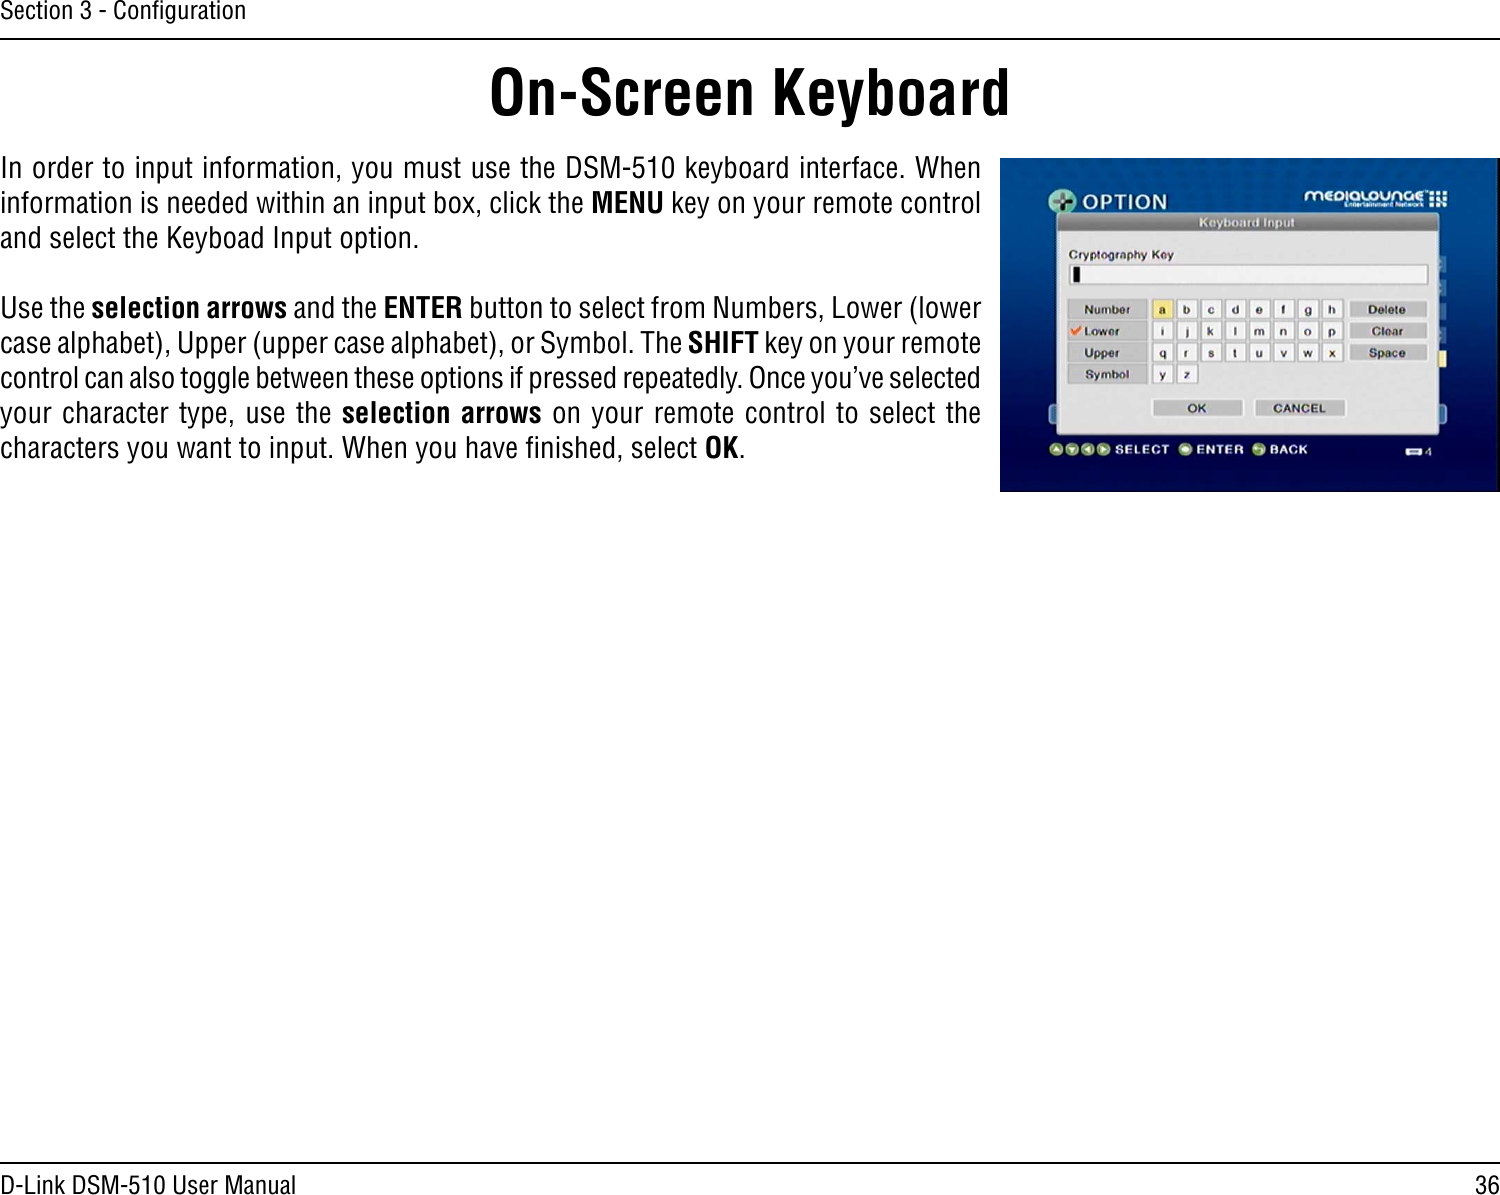 36D-Link DSM-510 User ManualSection 3 - ConﬁgurationIn order to input information, you must use the DSM-510 keyboard interface. When information is needed within an input box, click the MENU key on your remote control and select the Keyboad Input option.Use the selection arrows and the ENTER button to select from Numbers, Lower (lower case alphabet), Upper (upper case alphabet), or Symbol. The SHIFT key on your remote control can also toggle between these options if pressed repeatedly. Once you’ve selected your character type, use the selection arrows on your remote control to select the characters you want to input. When you have ﬁnished, select OK.On-Screen Keyboard